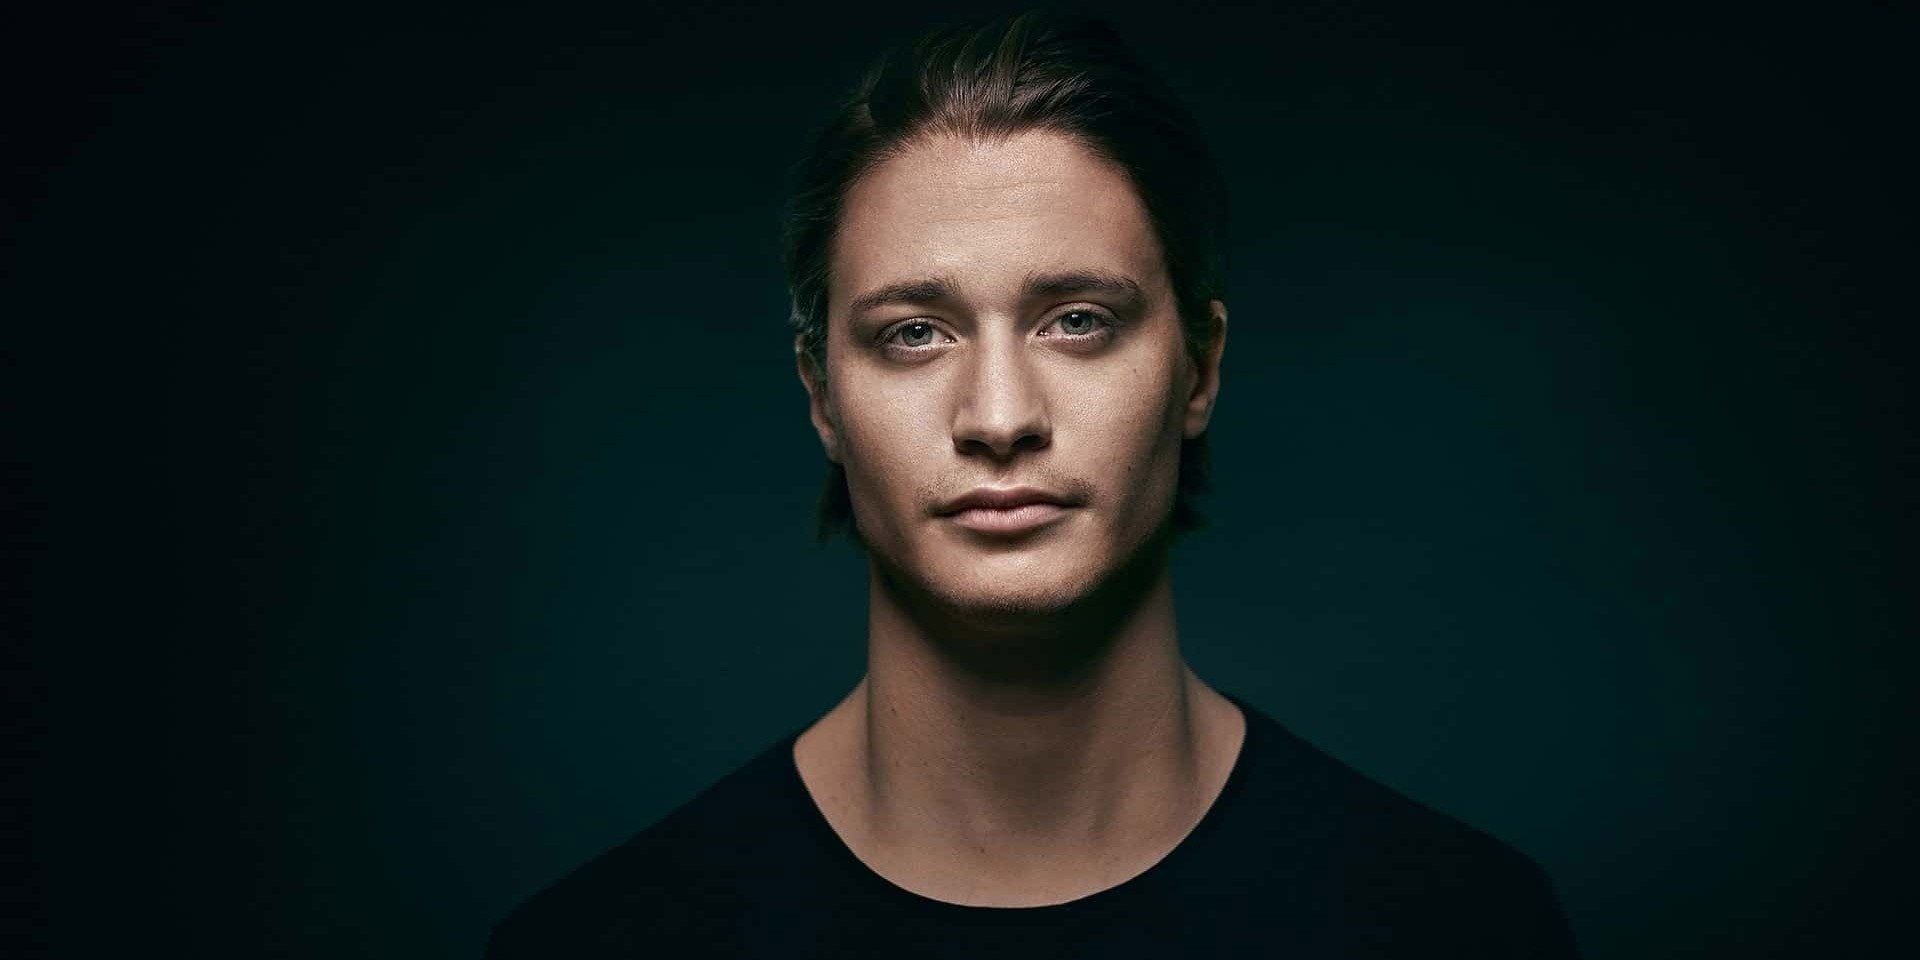 The Norwegian Embassy is giving away free VIP tickets to Kygo's Manila concert